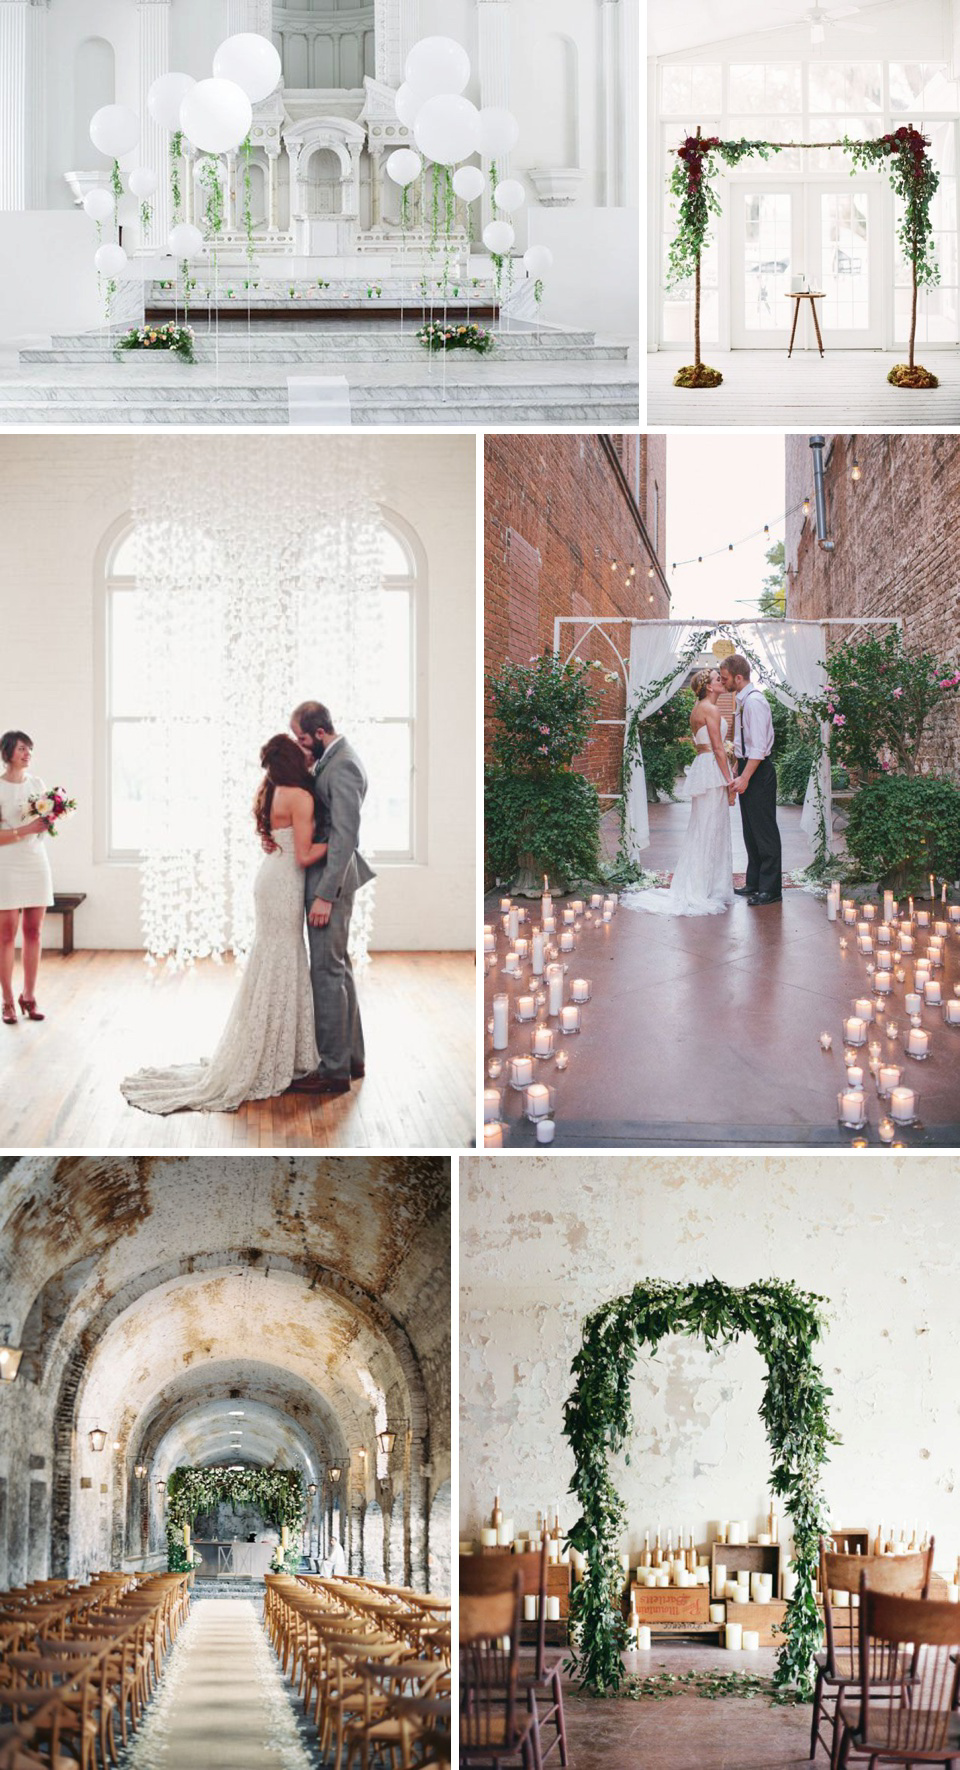 2016 Wedding Trends, by Pocketful of Dreams for Love My Dress®